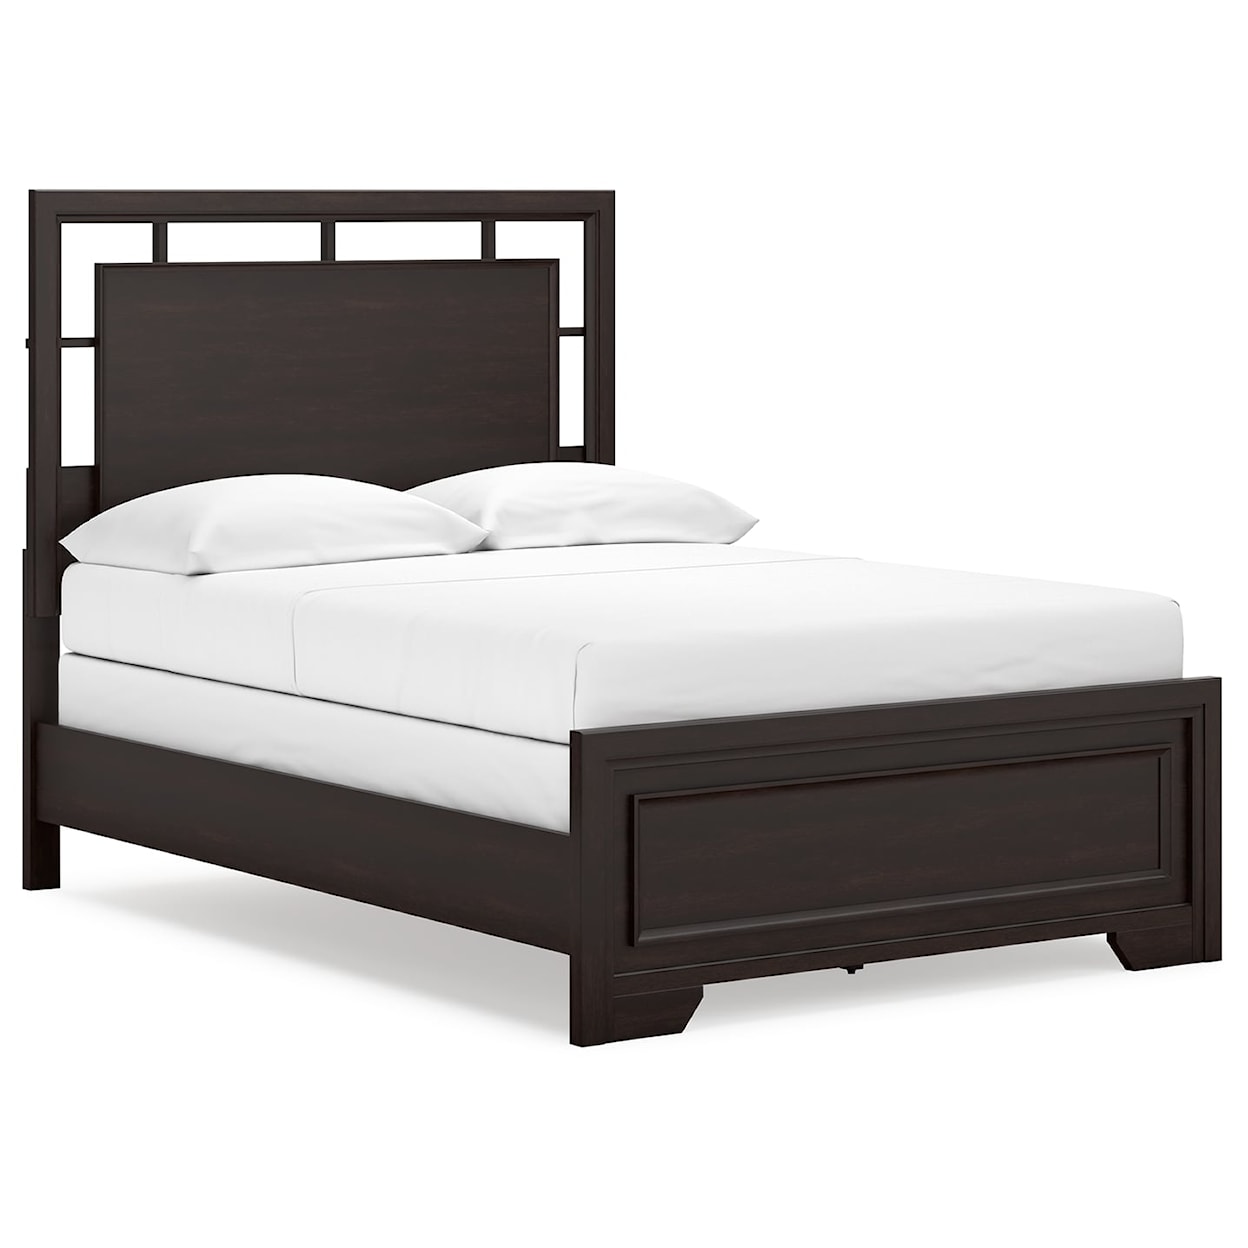 Benchcraft Covetown Full Panel Bed